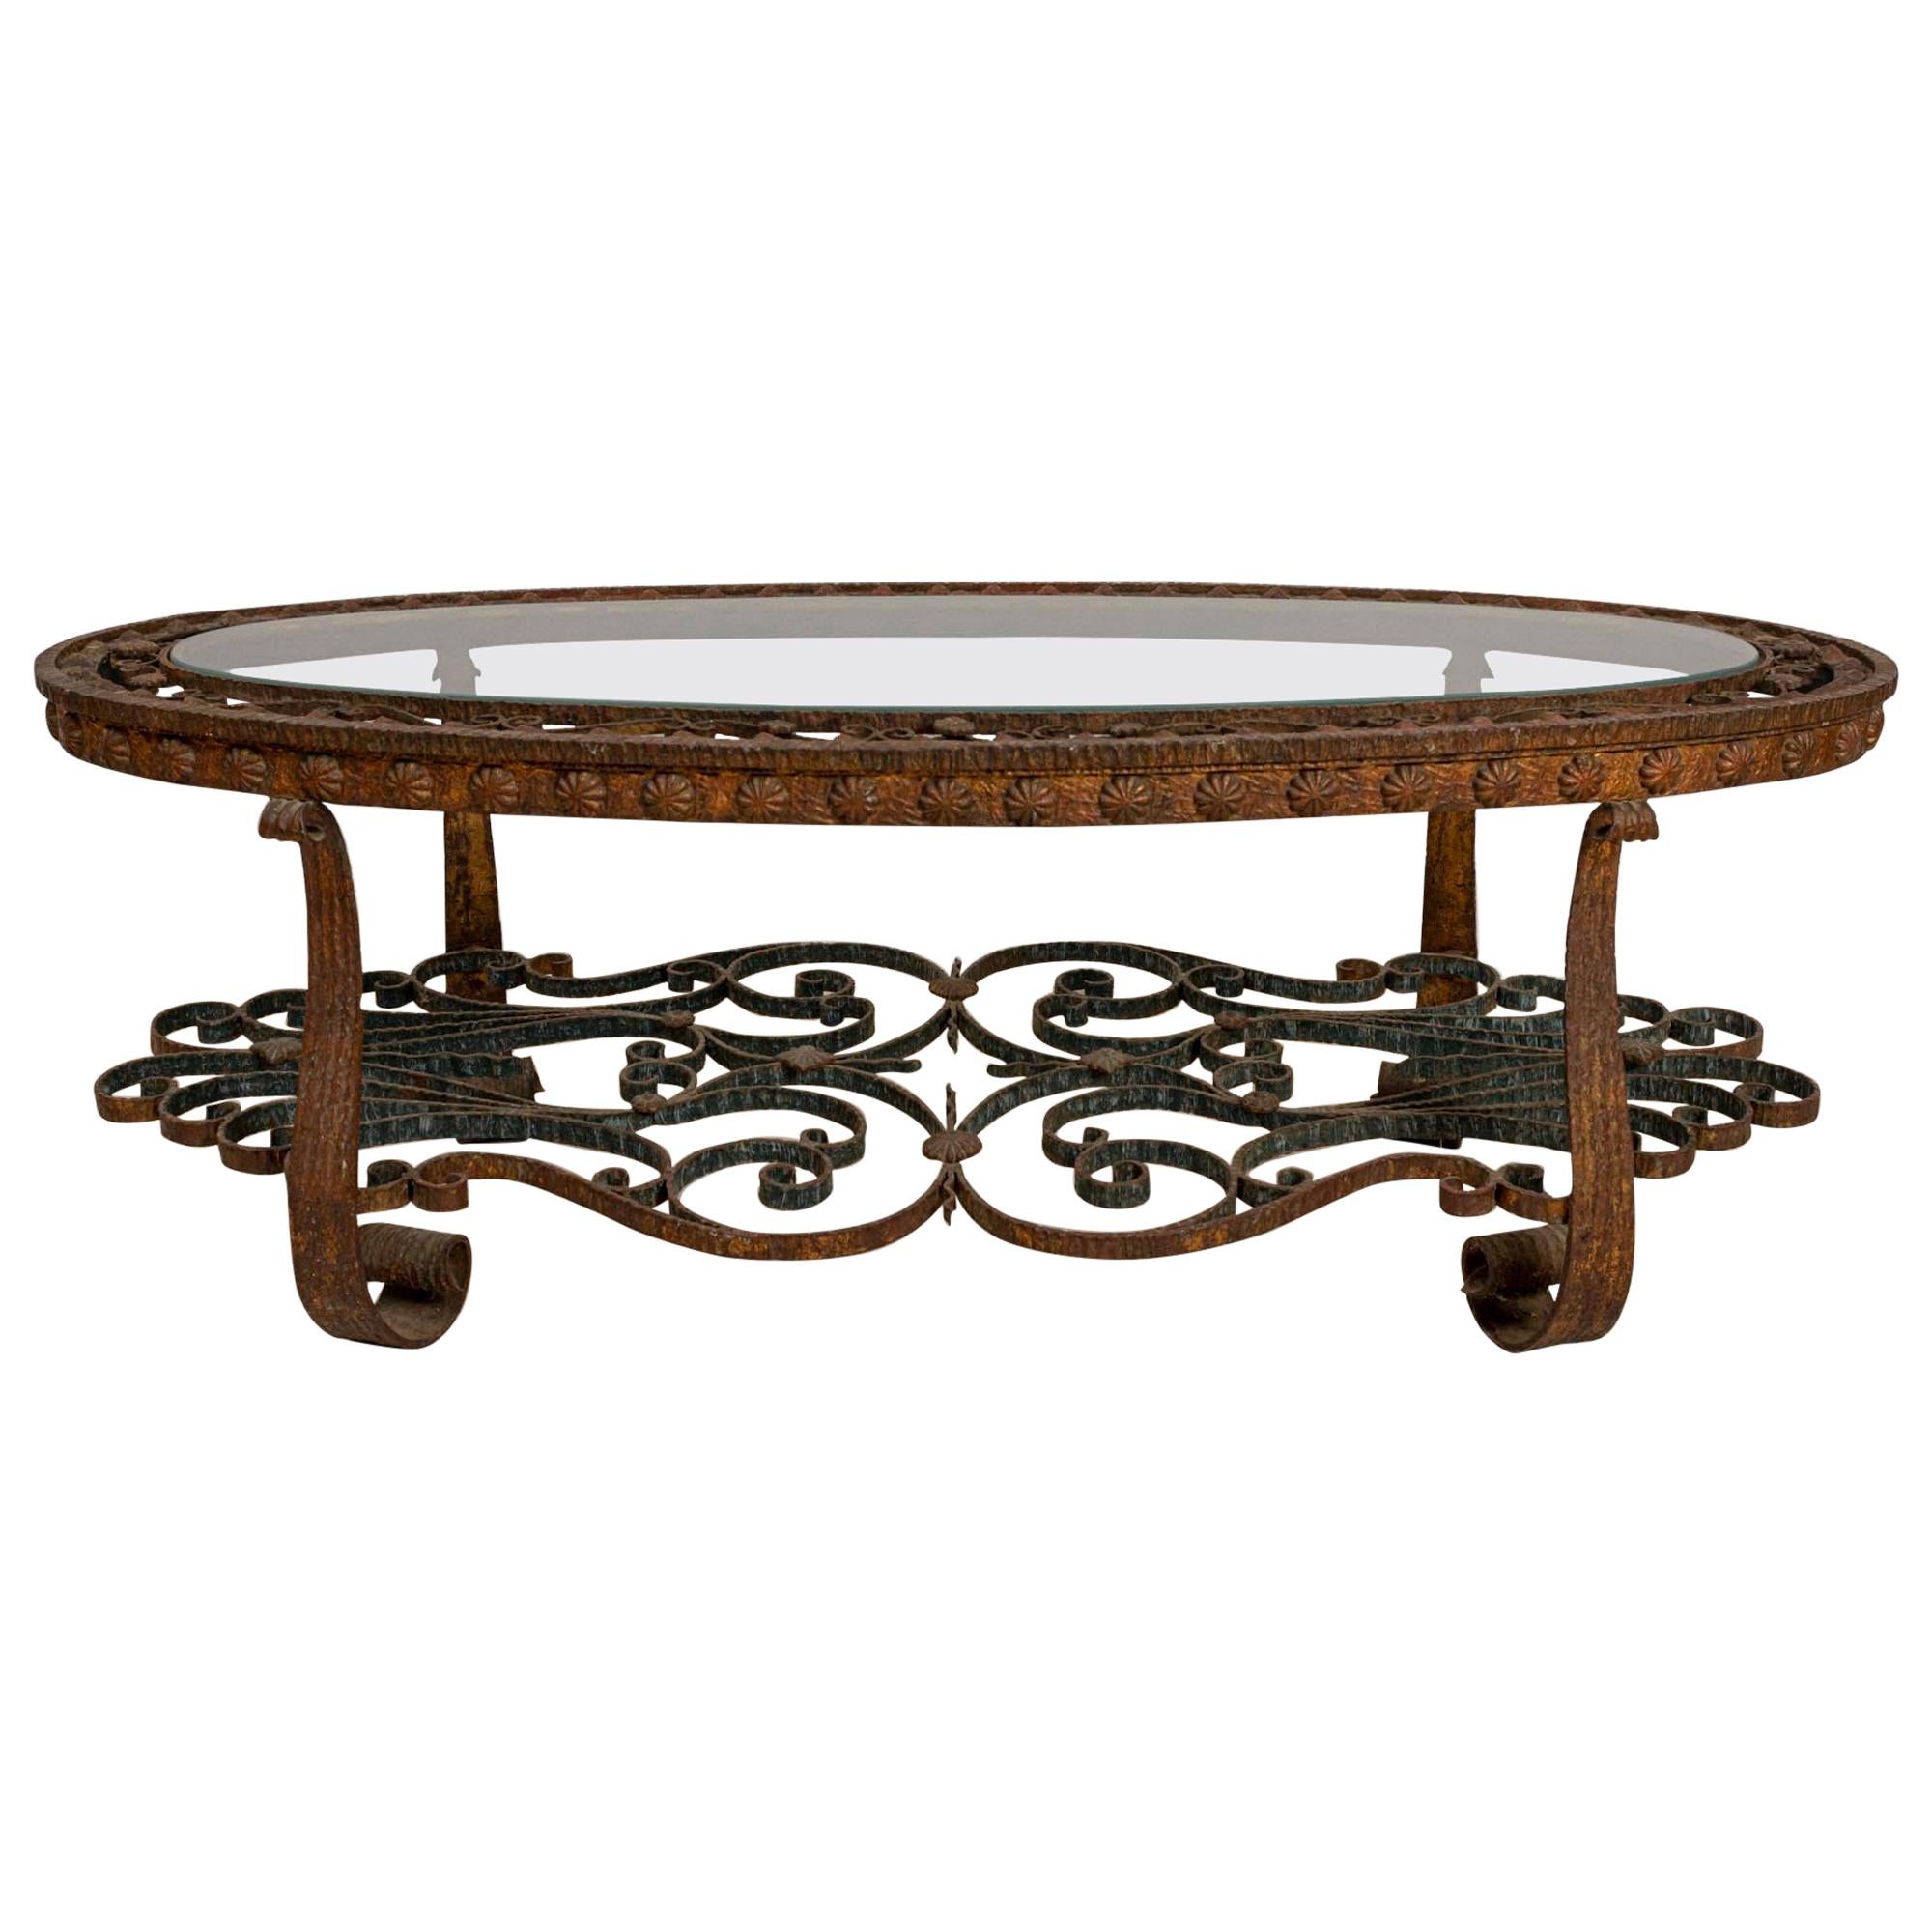 Spanish Oval Decorative Wrought Iron and Glass Coffee Table, circa 1940s